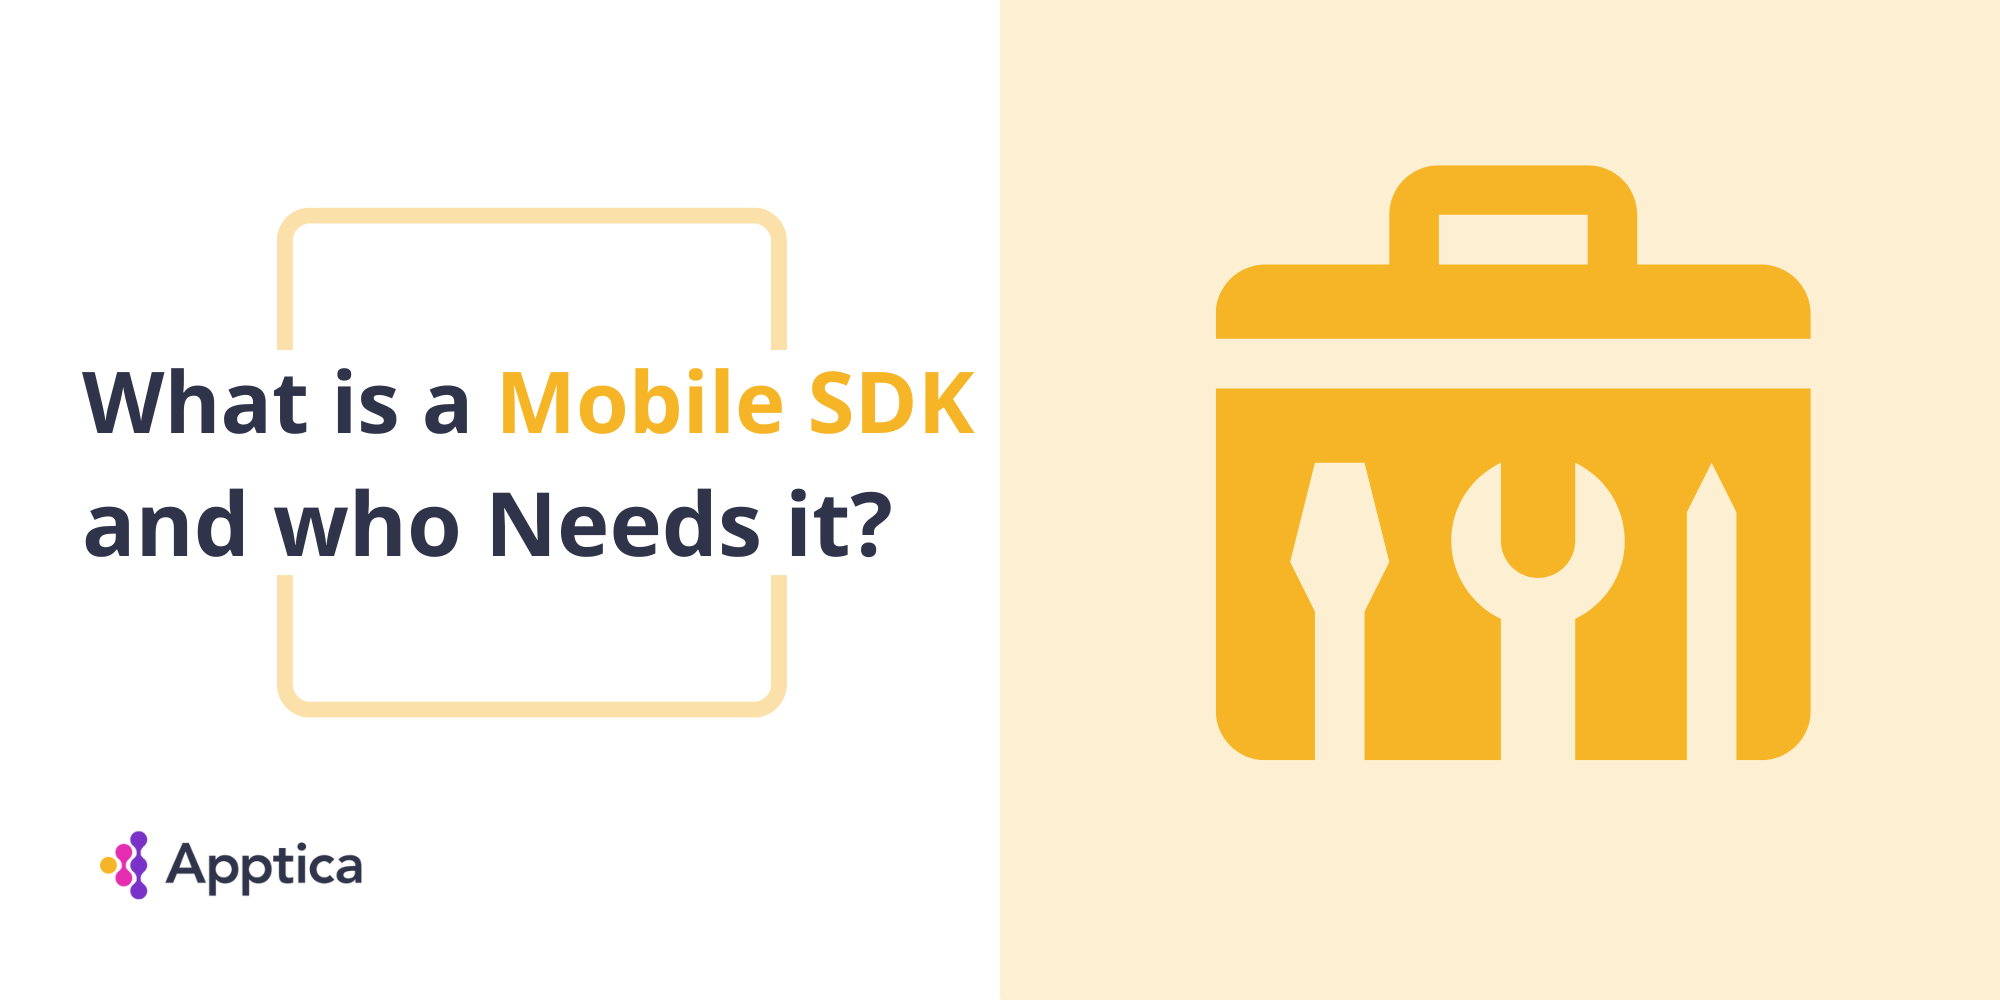 What is a Mobile SDK and who Needs it?